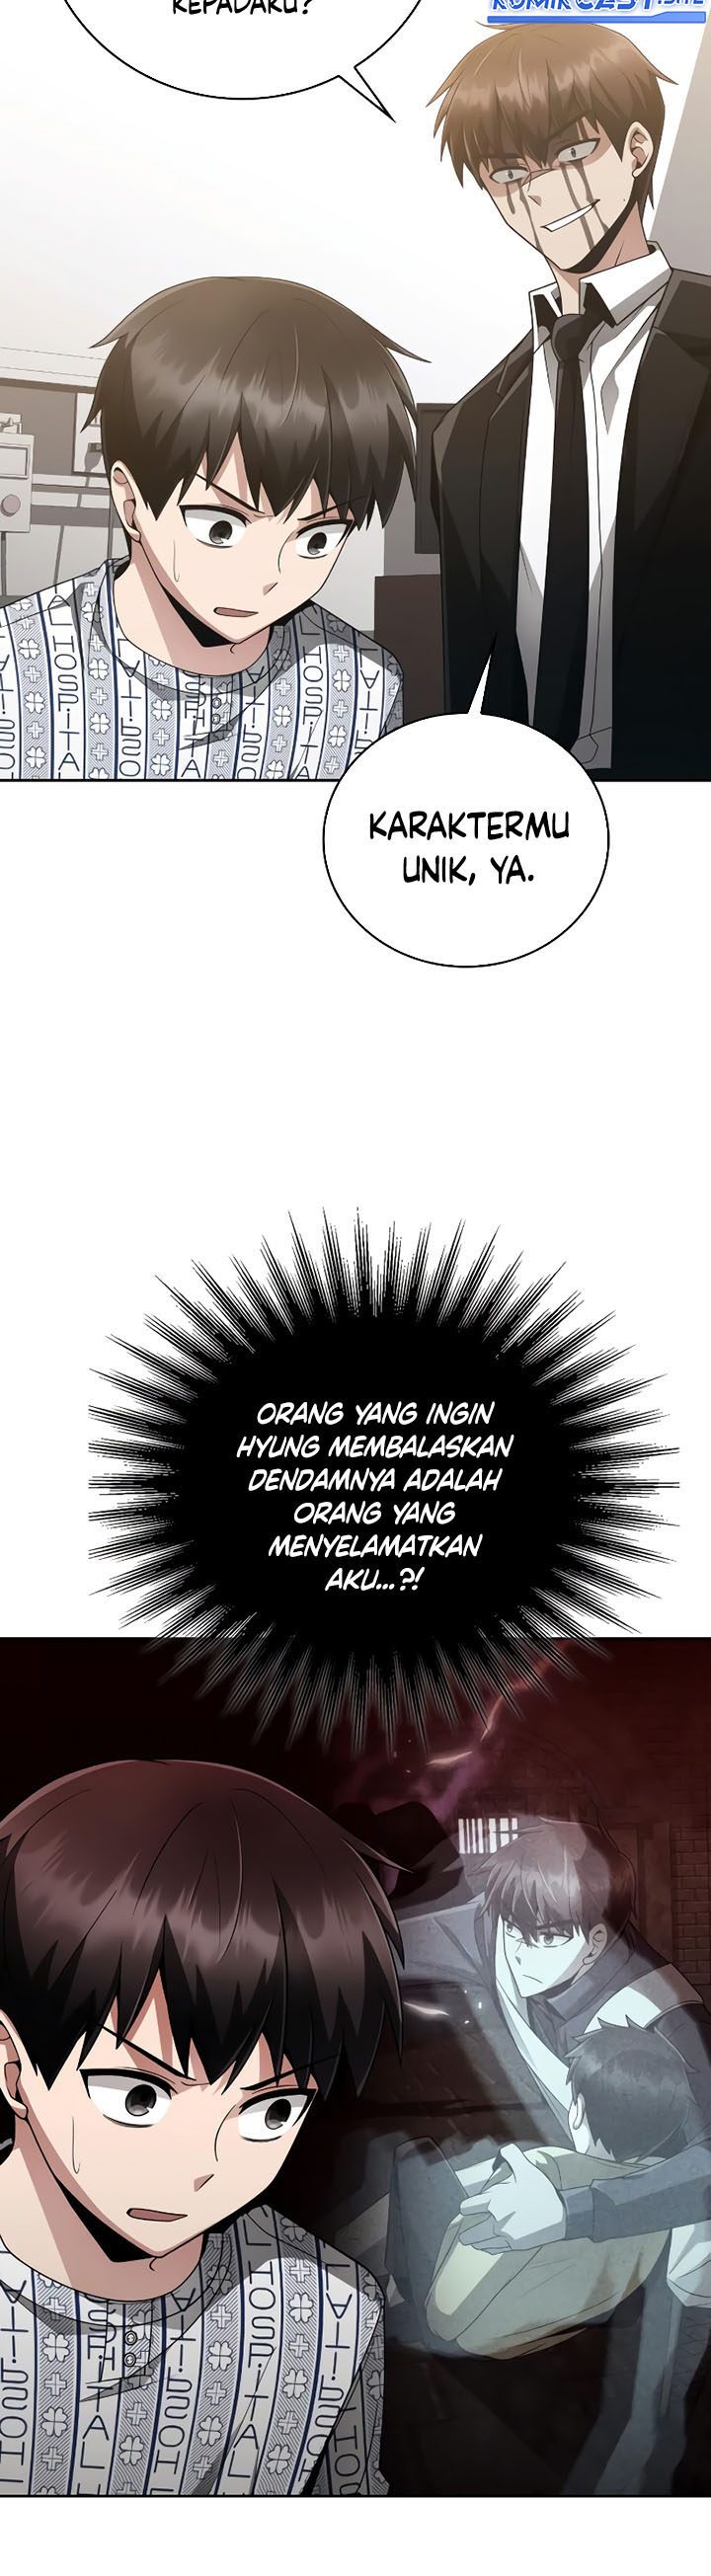 Dilarang COPAS - situs resmi www.mangacanblog.com - Komik clever cleaning life of the returned genius hunter 021 - chapter 21 22 Indonesia clever cleaning life of the returned genius hunter 021 - chapter 21 Terbaru 22|Baca Manga Komik Indonesia|Mangacan